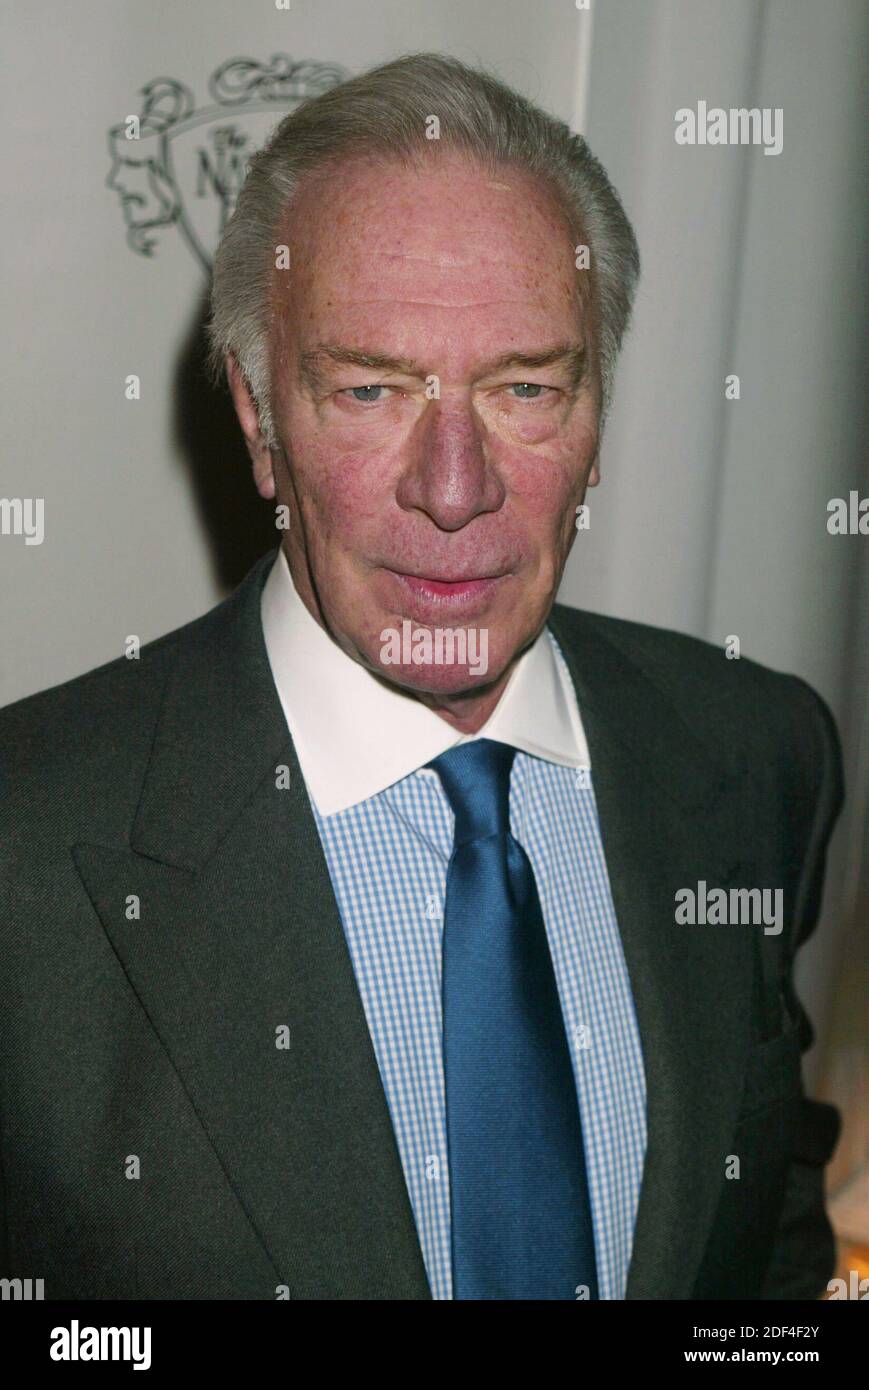 Christopher Plummer partecipa al National Board of Review of Motion Pictures Annual Awards Gala al Tavern on the Green di New York City il 14 gennaio 2003. Foto: Henry McGee/MediaPunch Foto Stock